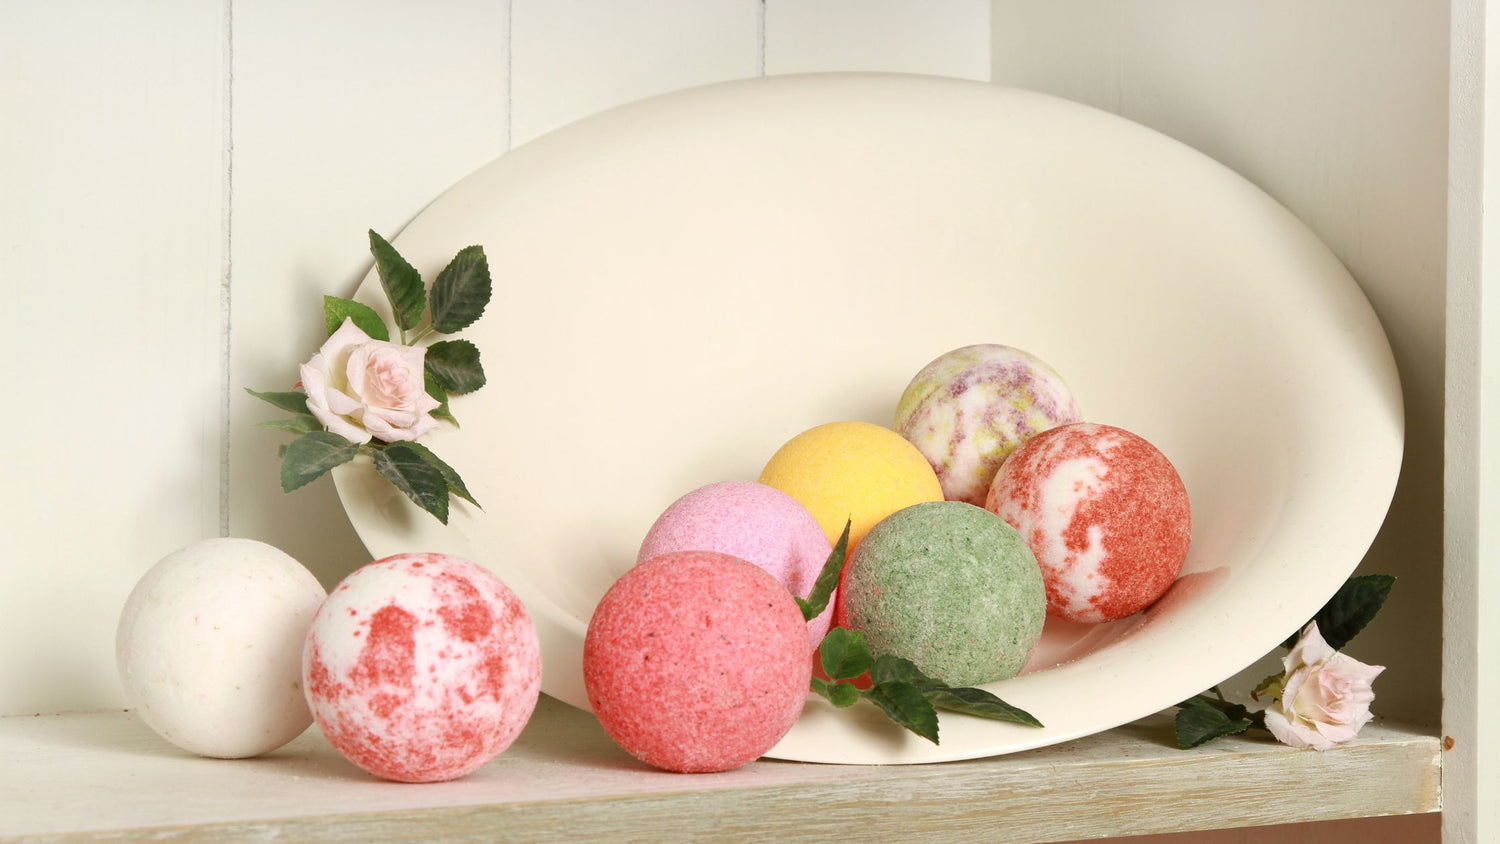 Bath Bombs vs Shower Bombs - Differences and How to Choose Between Them